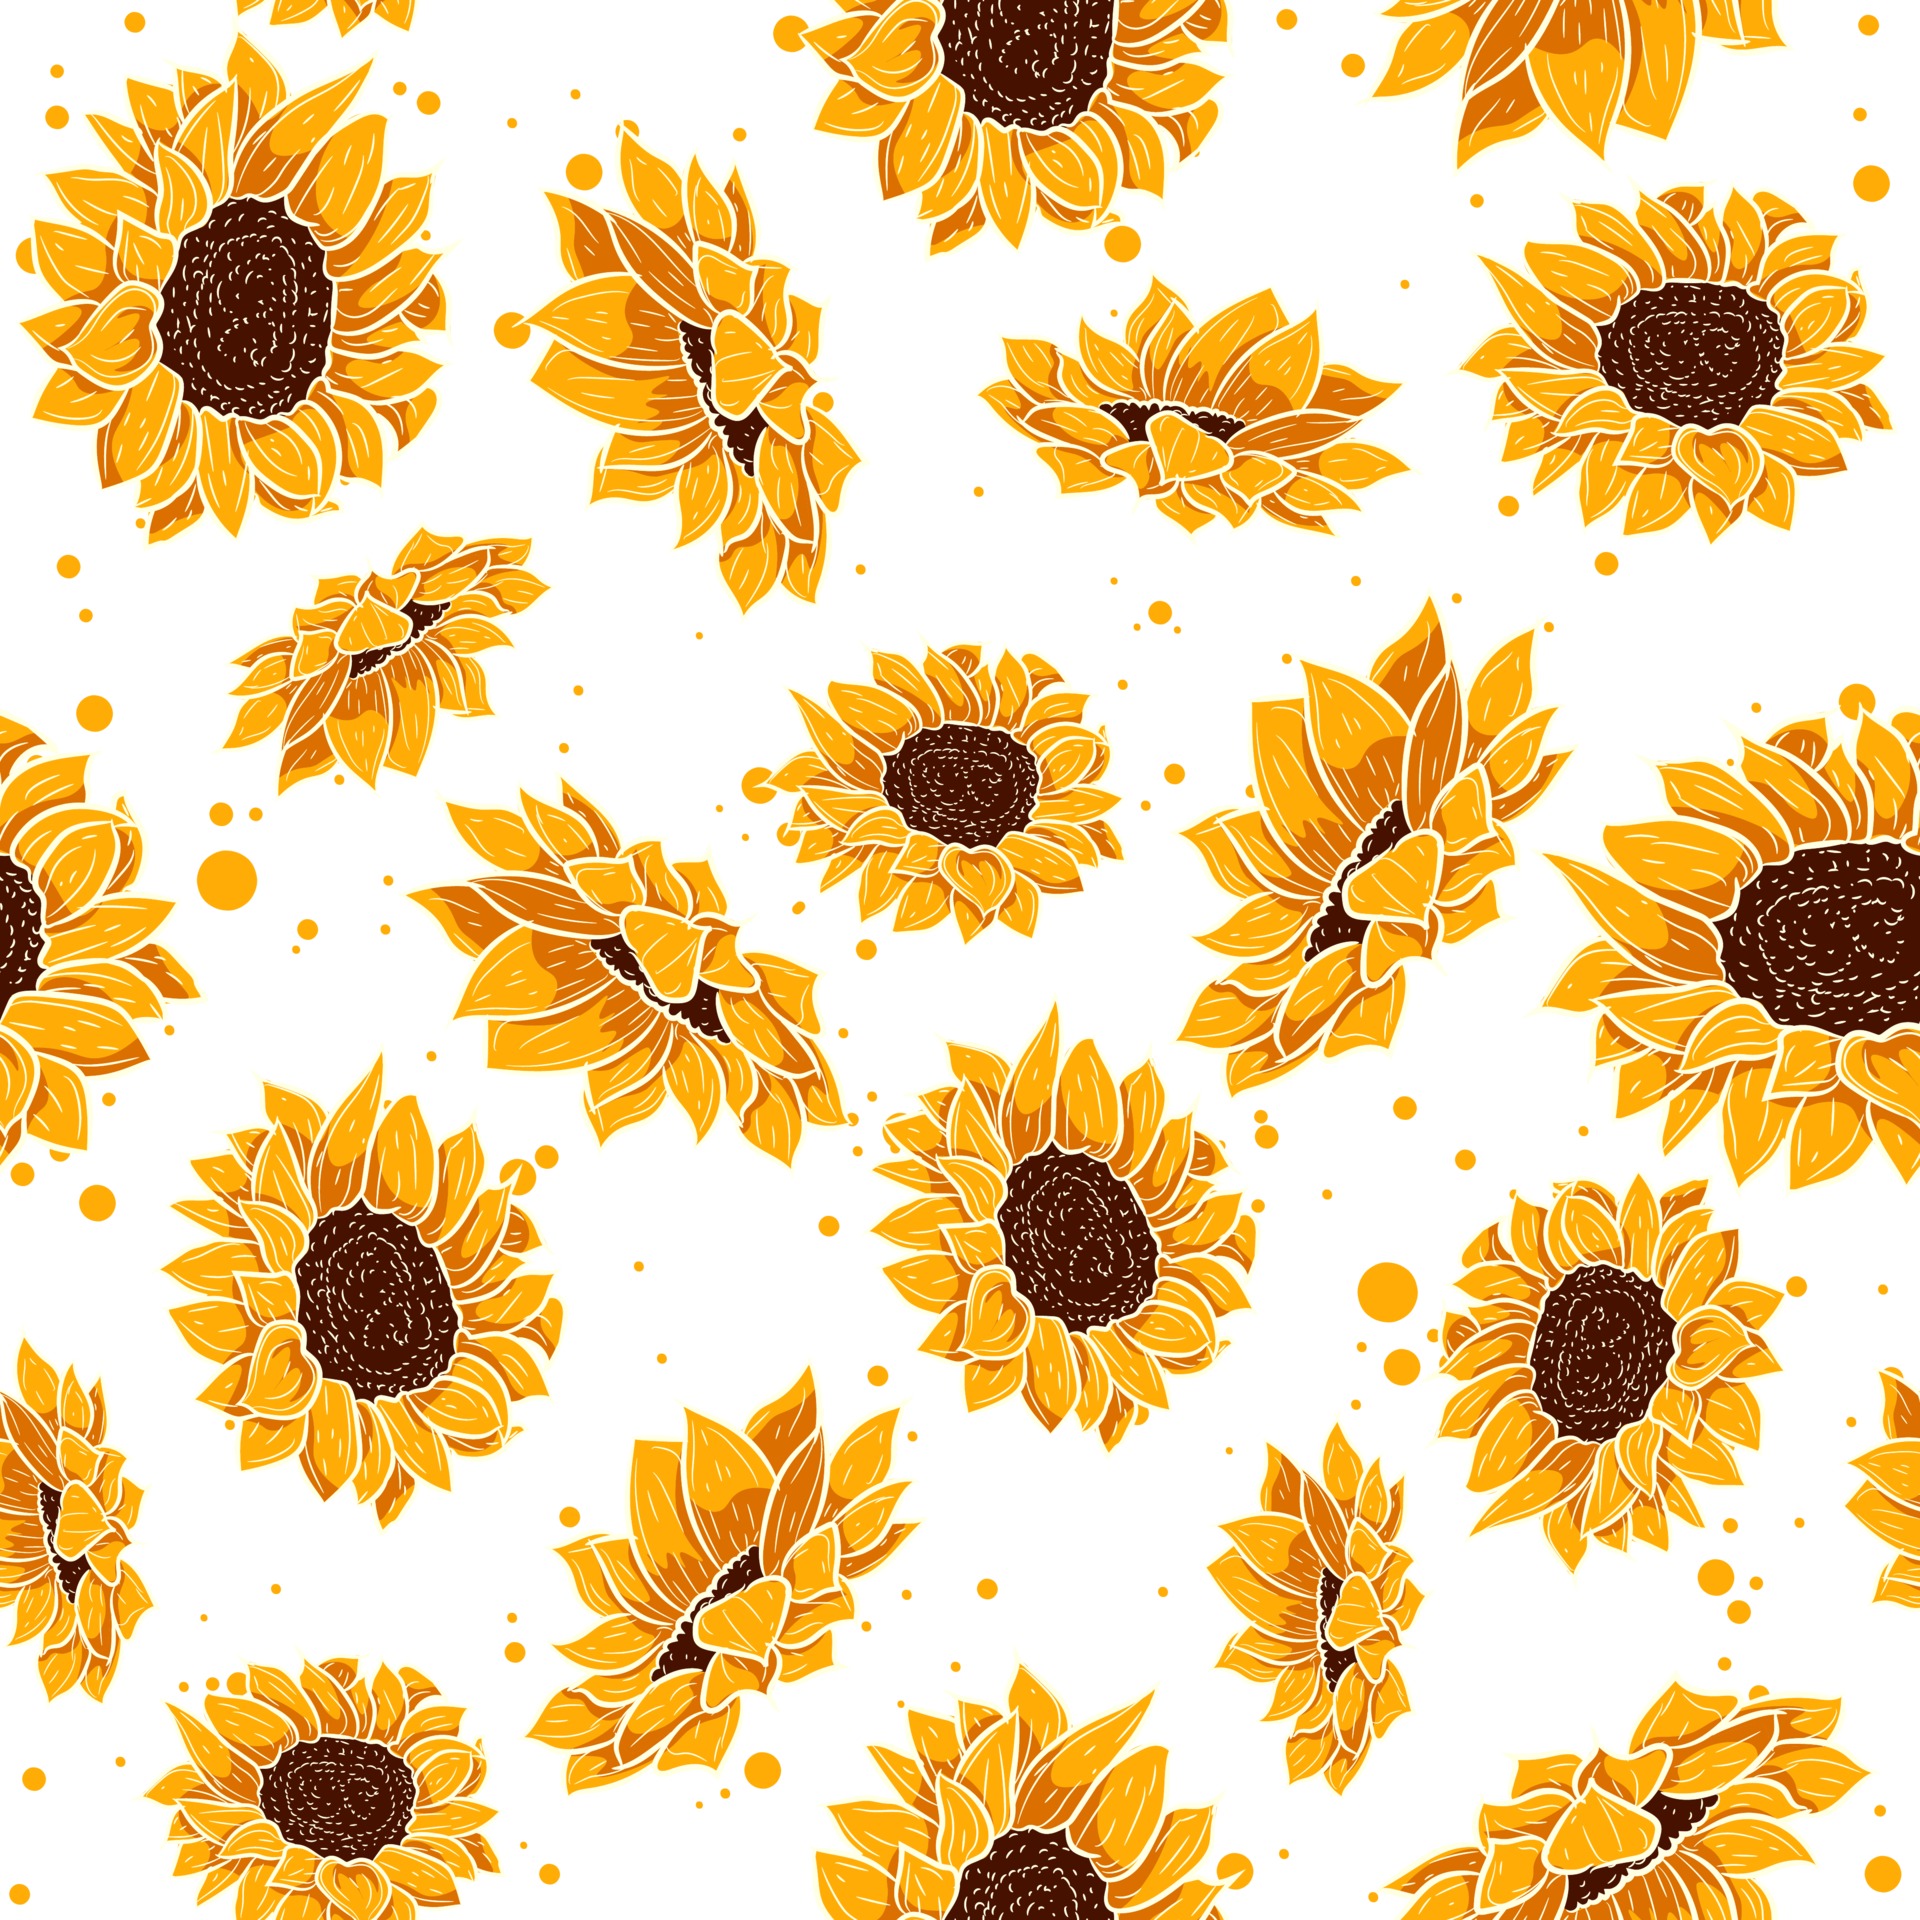 Yellow seamless pattern with tropical summer flowers. Floral repetition background with spring floral elements. Vector wallpaper with sunflower and daisy plants in bloom